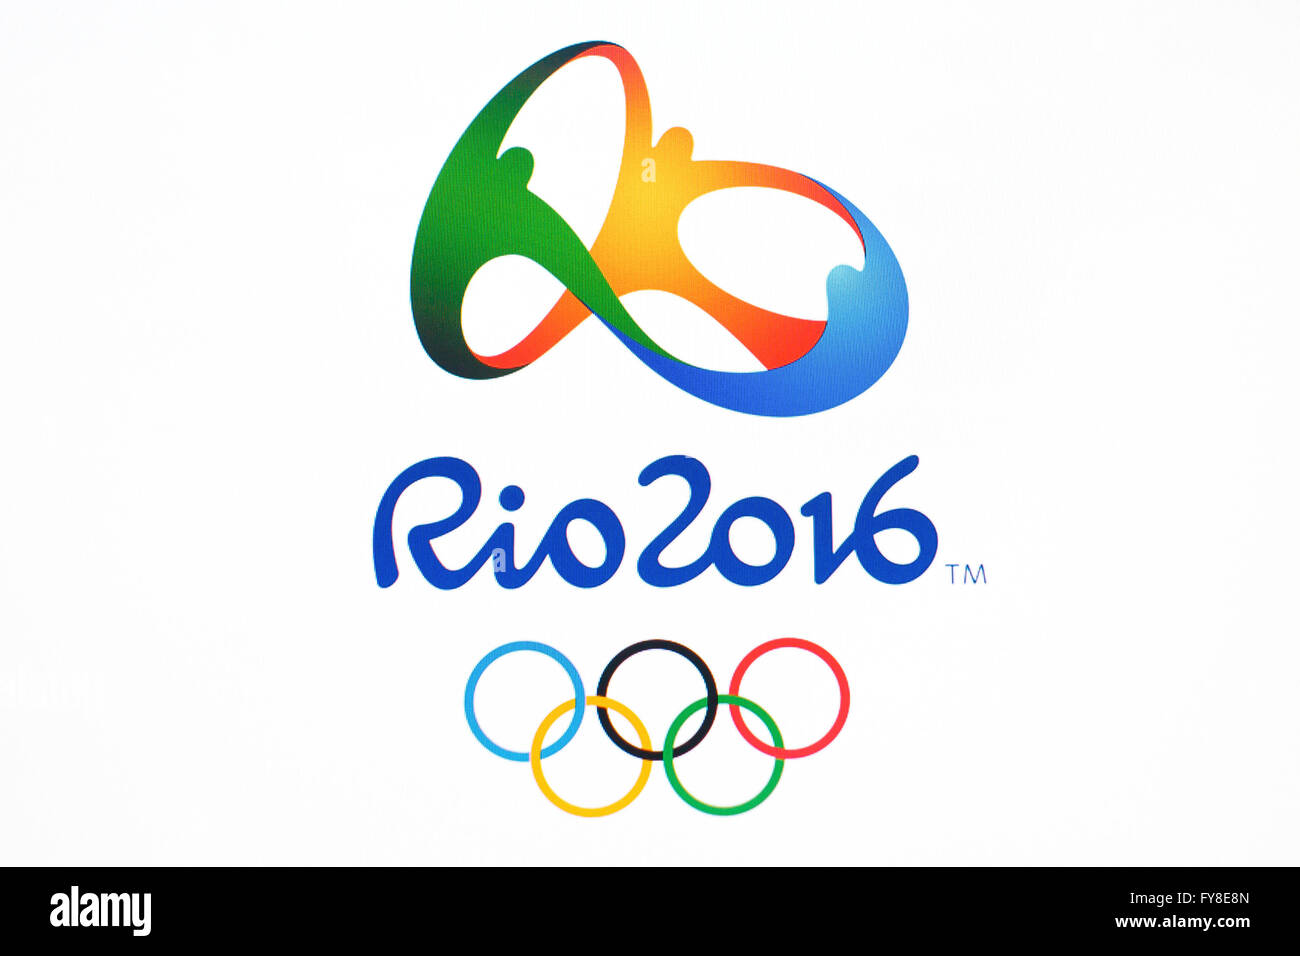 GDANSK, POLAND - NOVEMBER 20, 2015. On computer screen- official logo of the Rio 2016 Summer Olympics Games in Brasil, Editorial Stock Photo